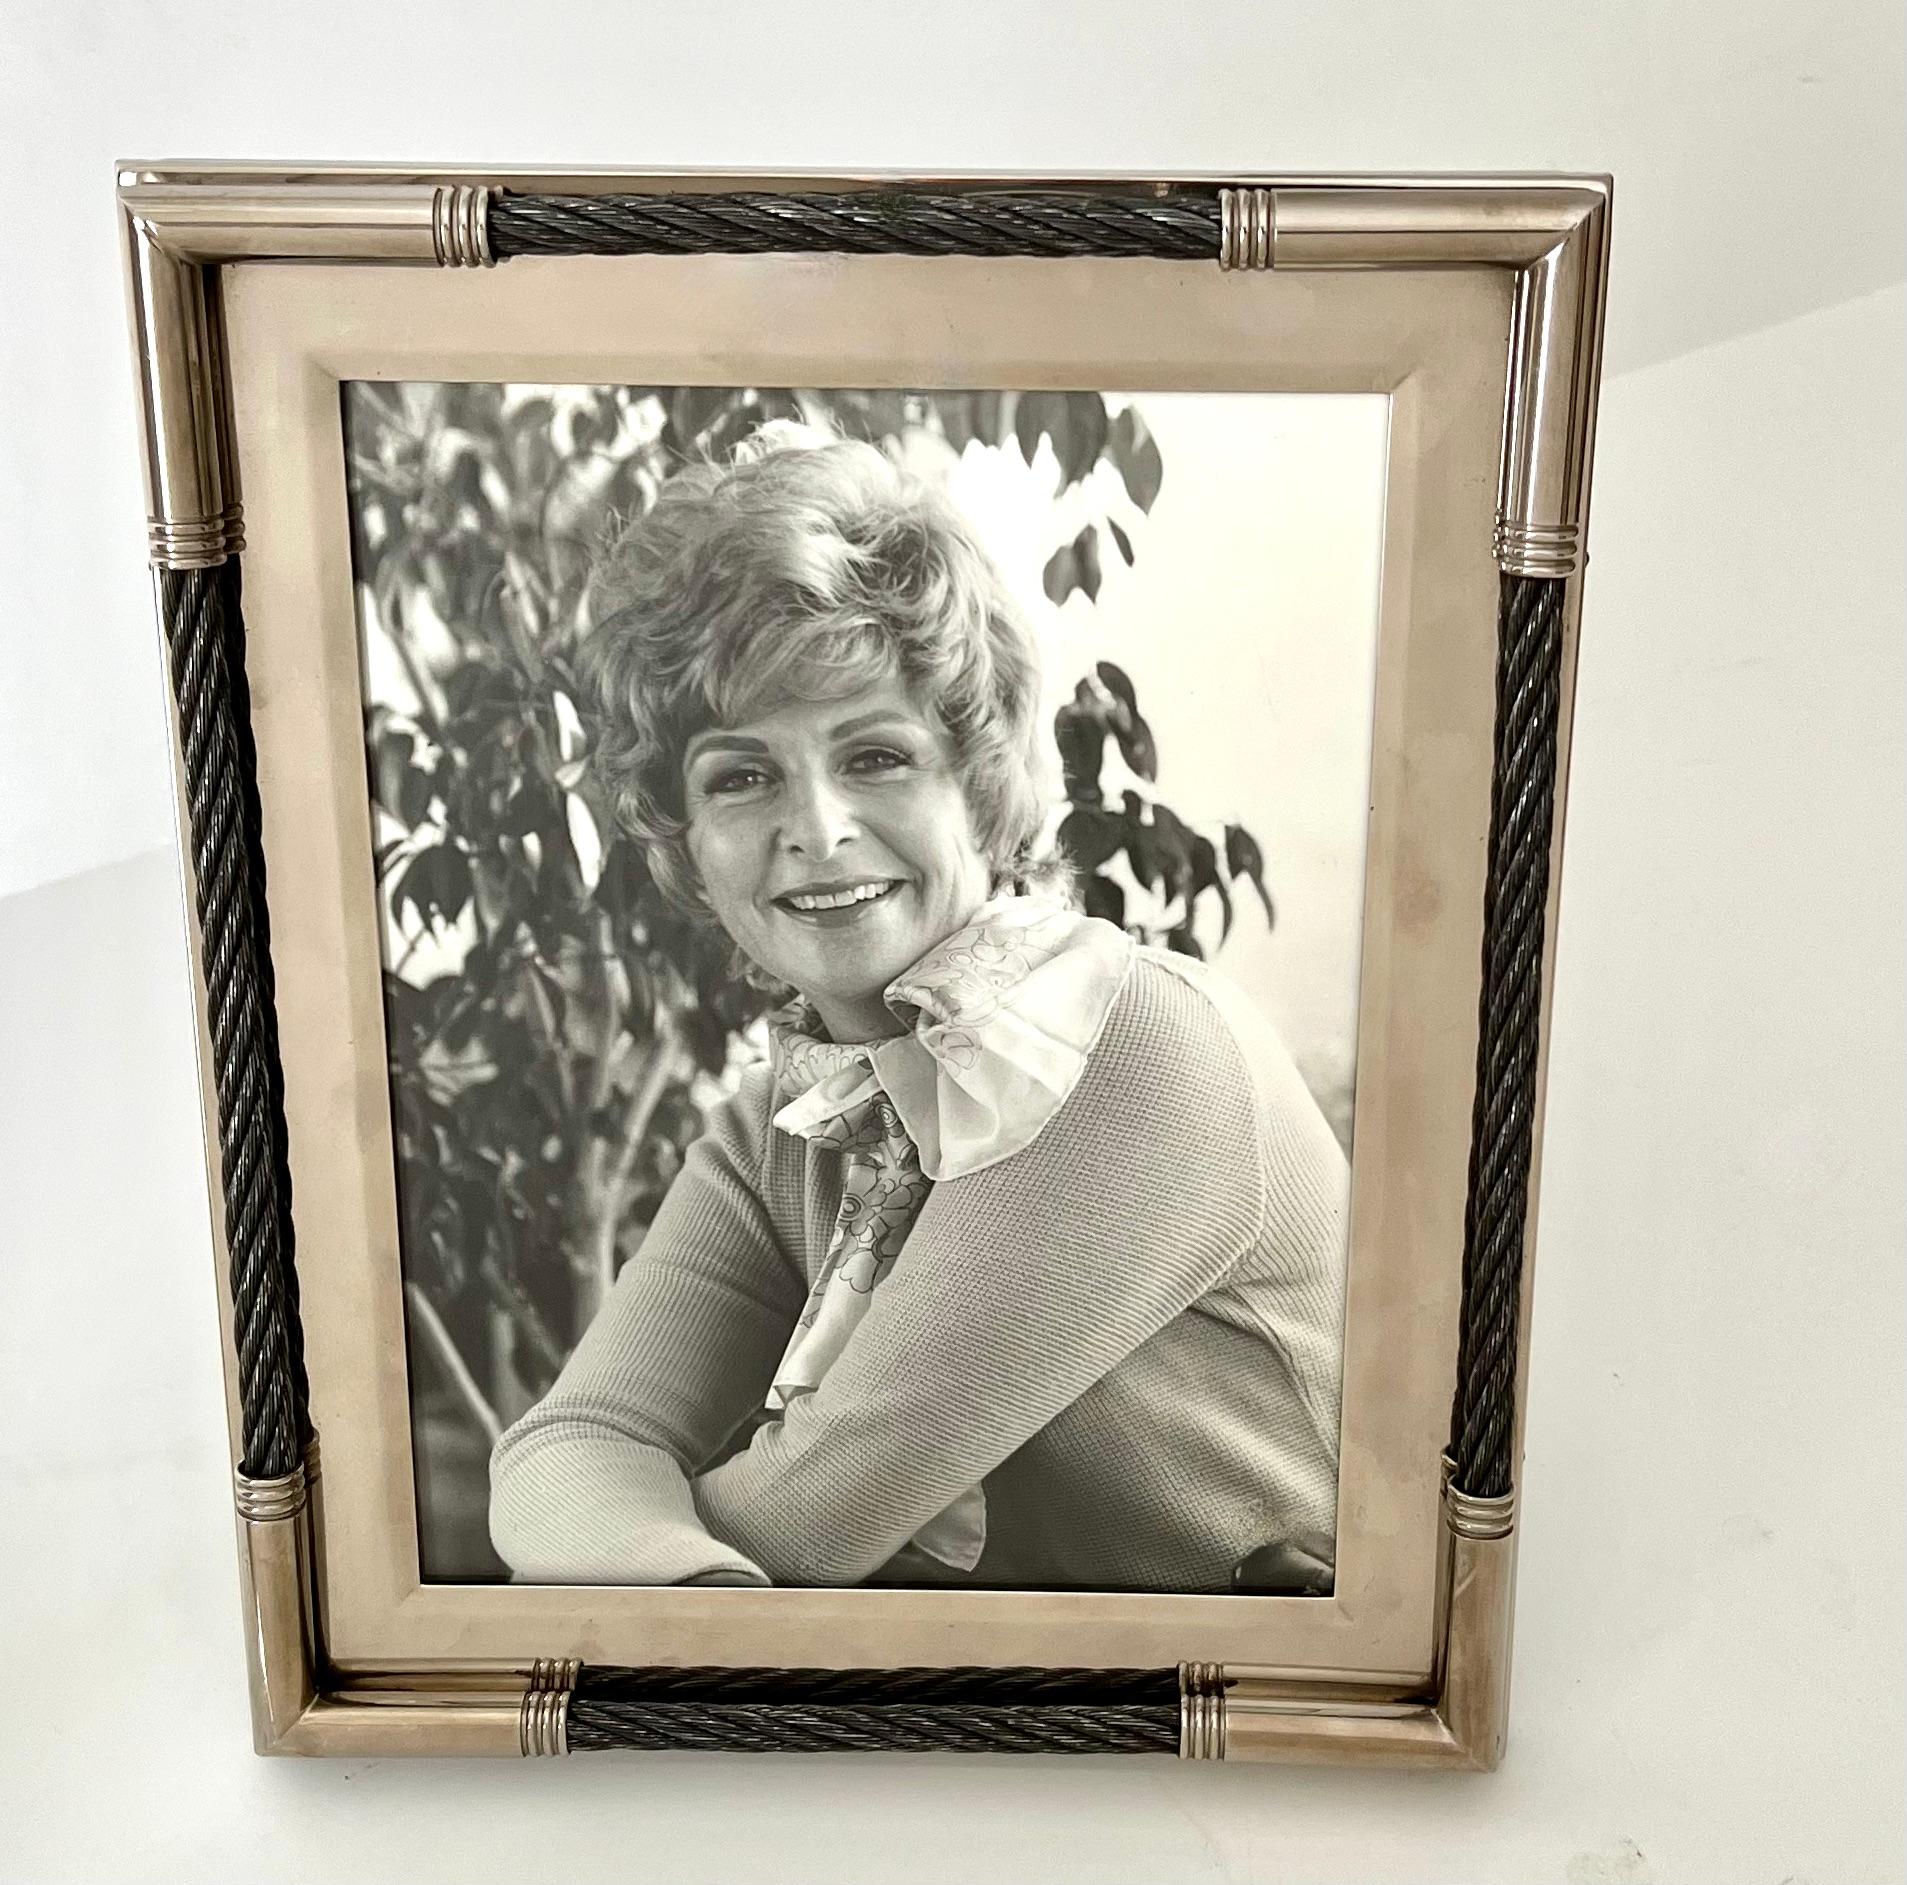 A silver plate frame for 8 x 10 photos. The piece is unique in that it uses woven twisted wire as an accent and it looks very luxurious. The sliver is in very good overall condition and is polished. The piece sits on a standard photo stand that